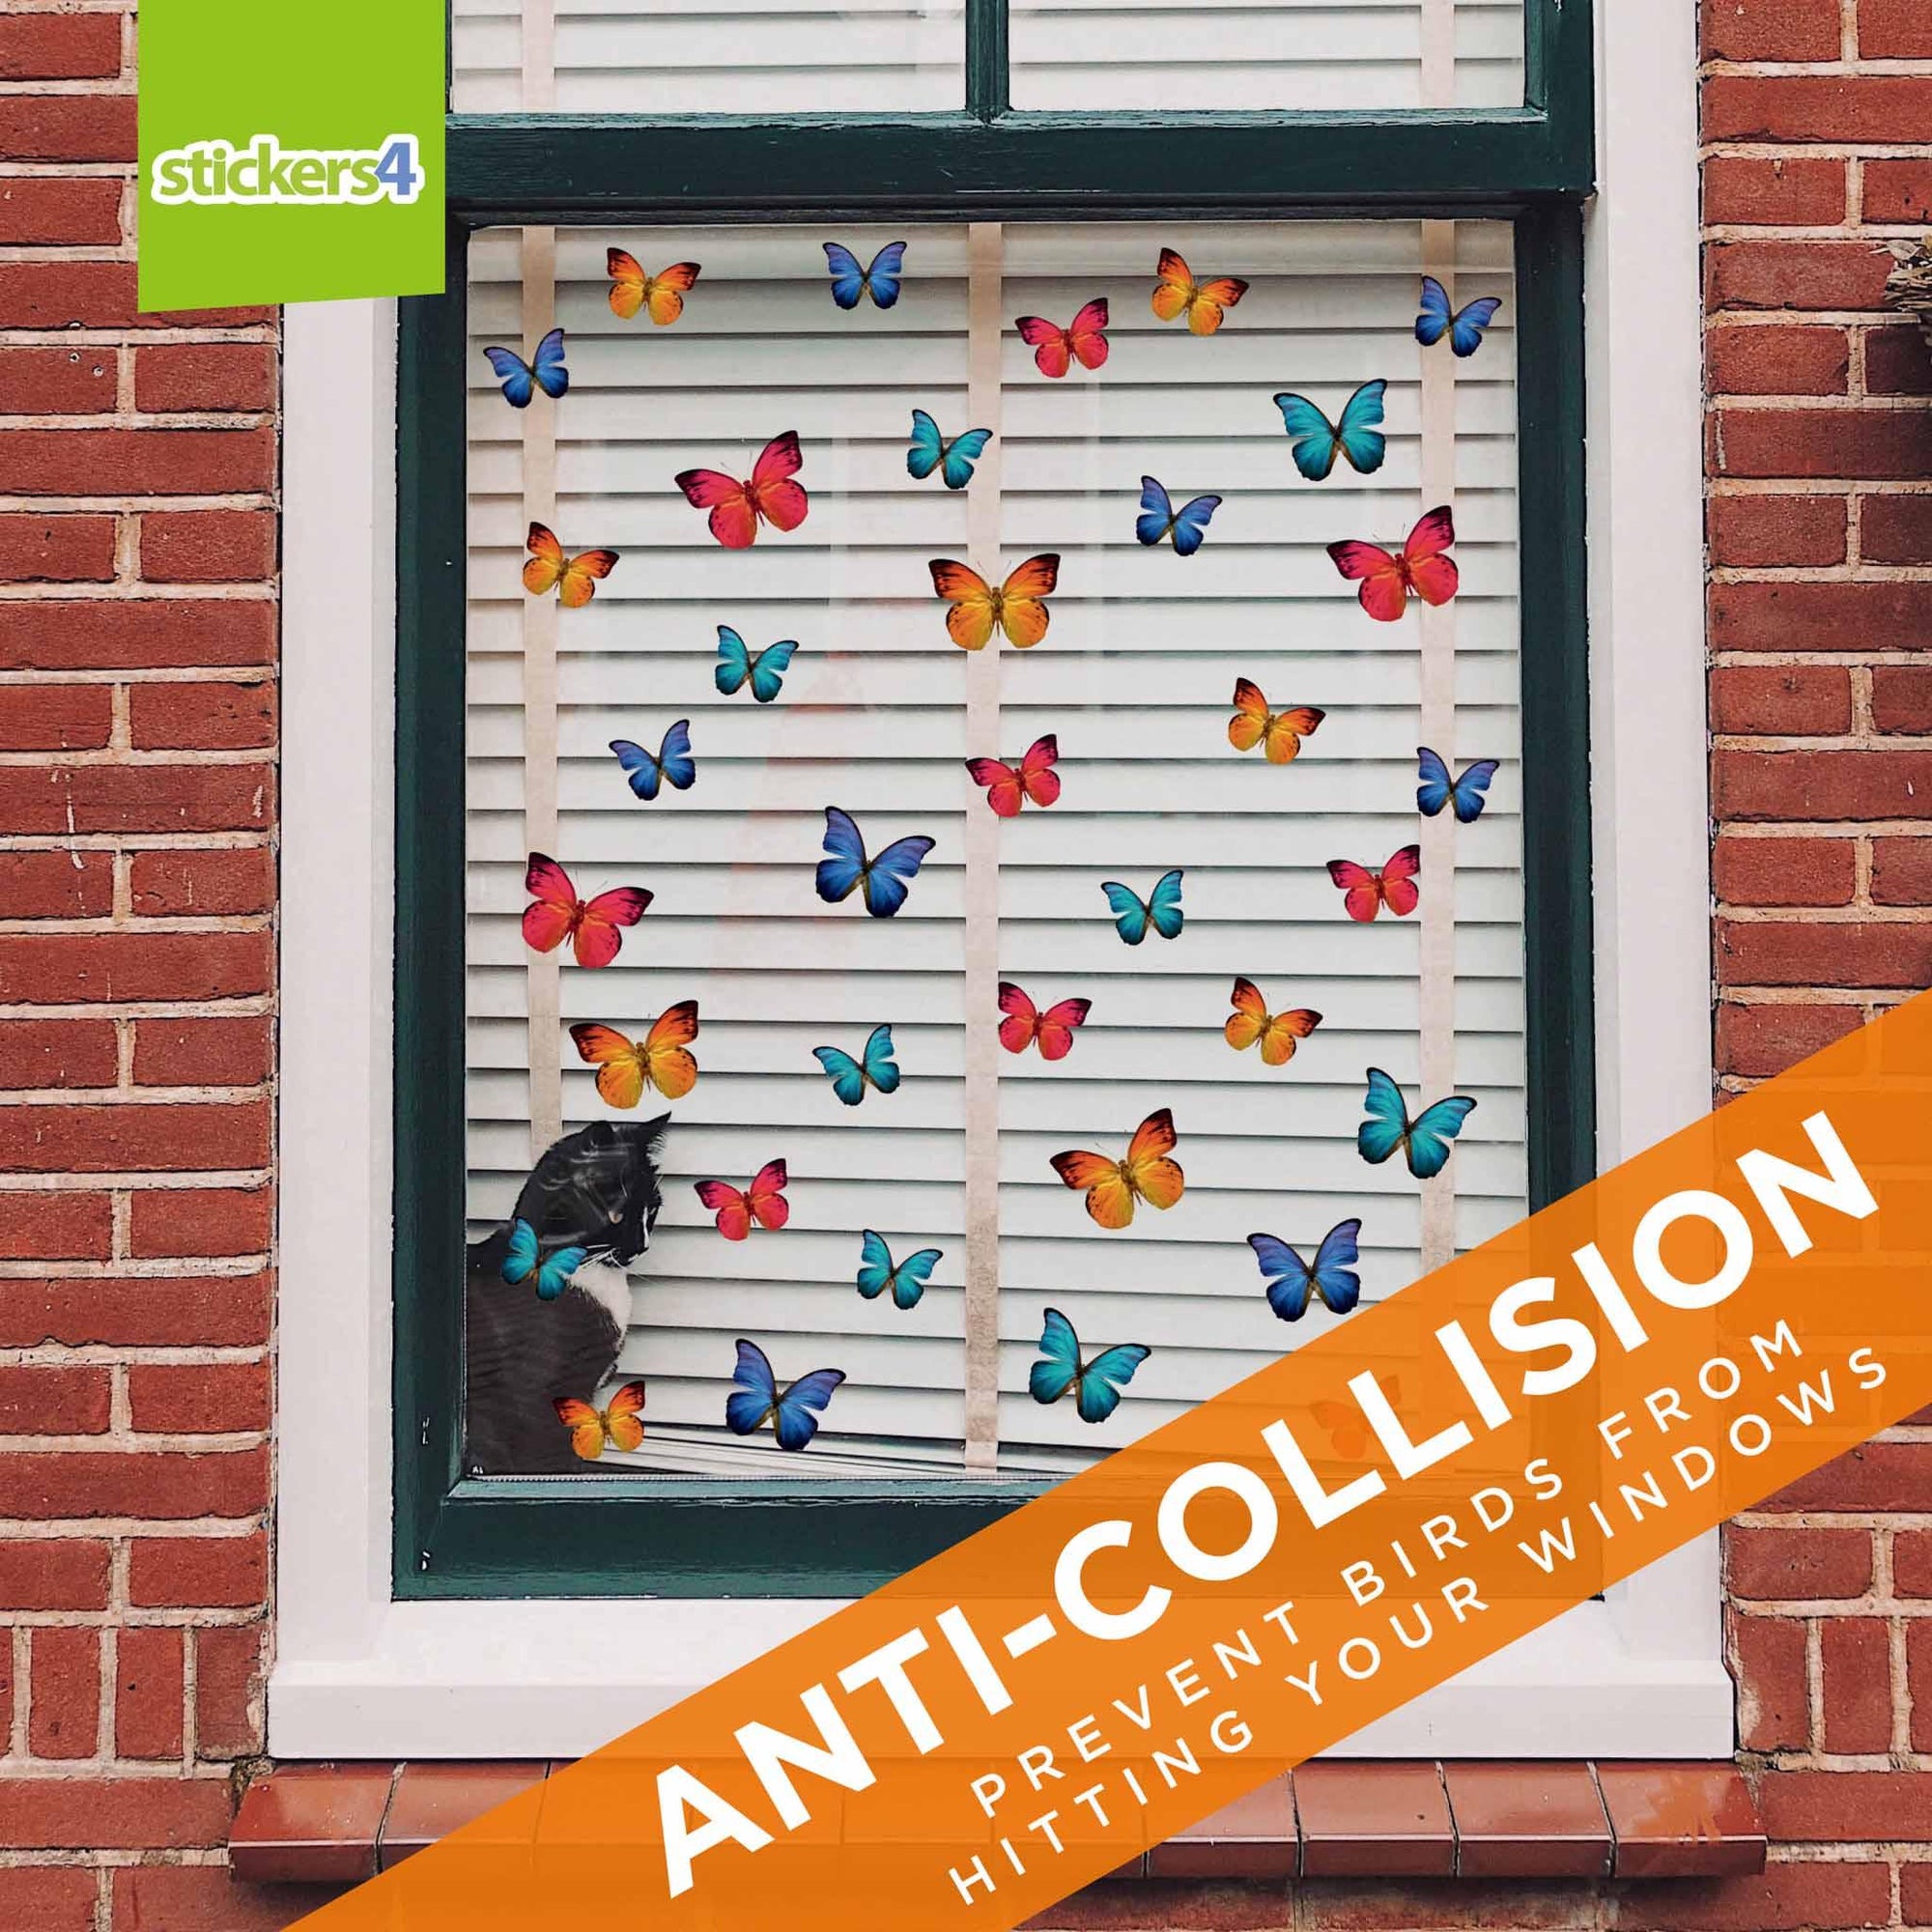 36 Small Colourful Butterfly Static Cling Window Stickers Decorative Bird Strike Prevention